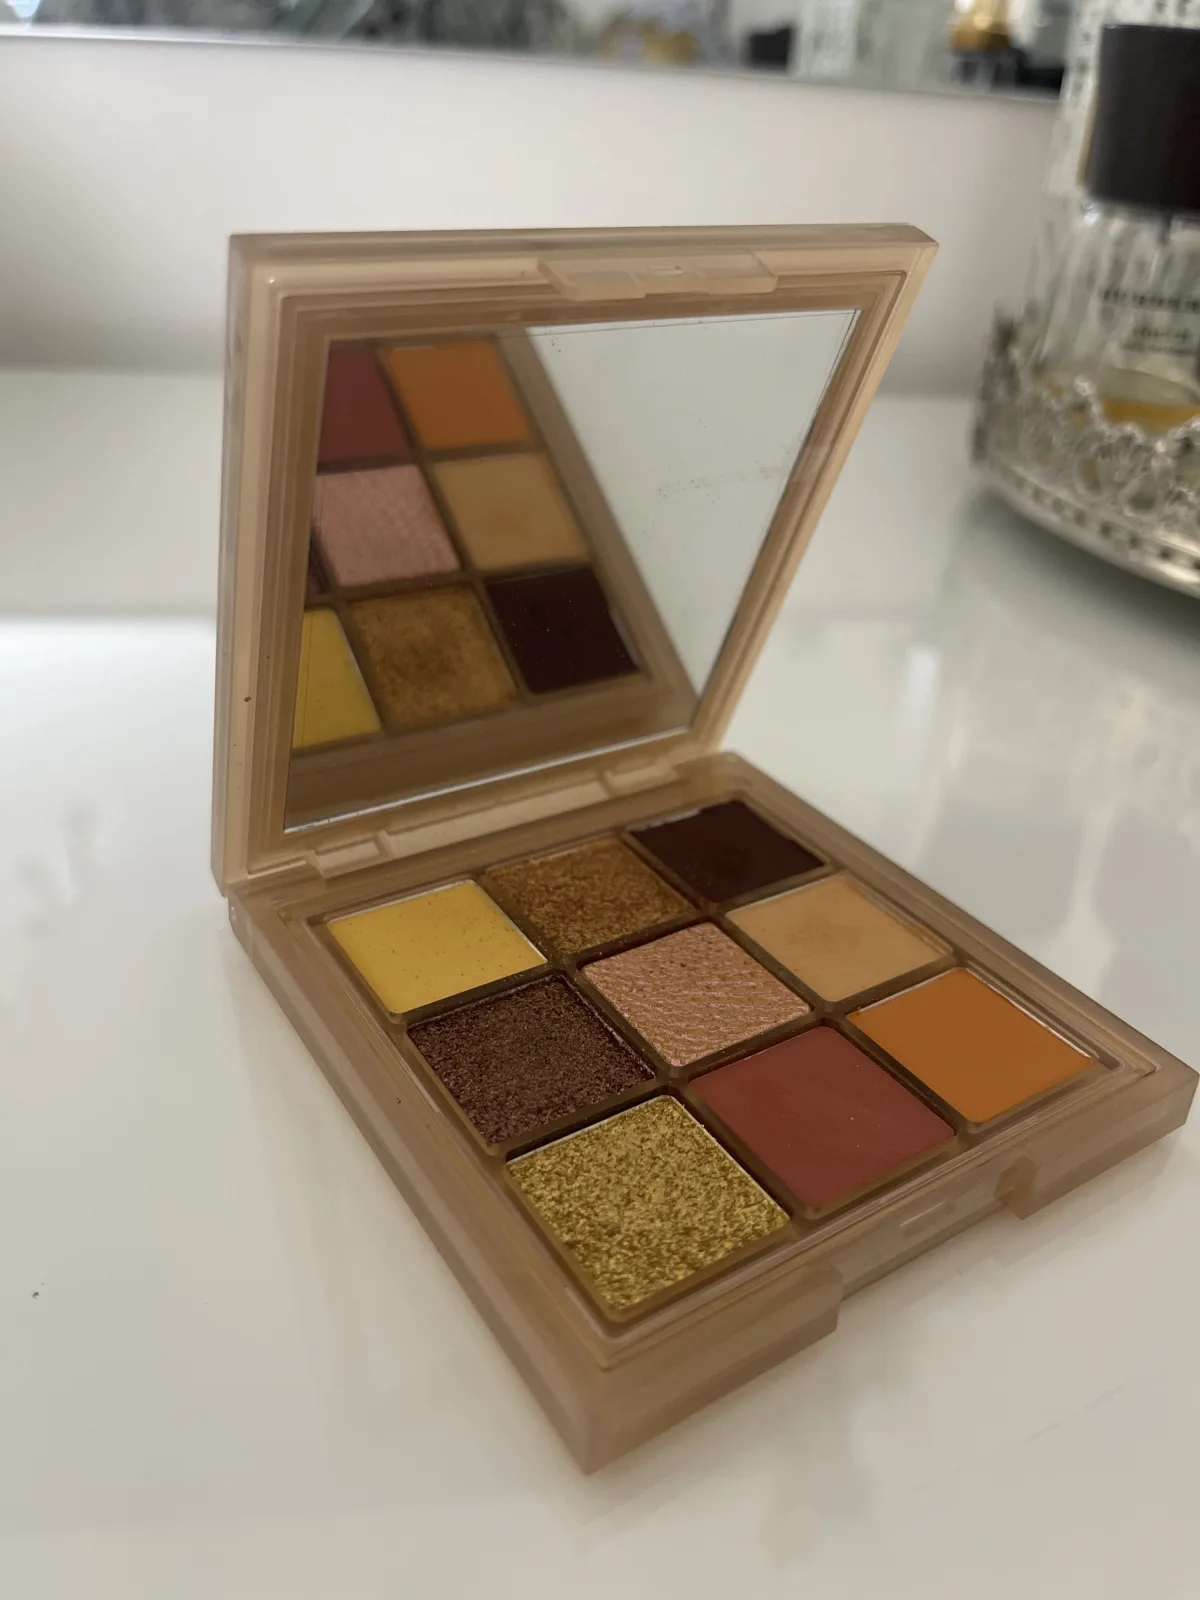 Topaz Obsessions Palette - review image